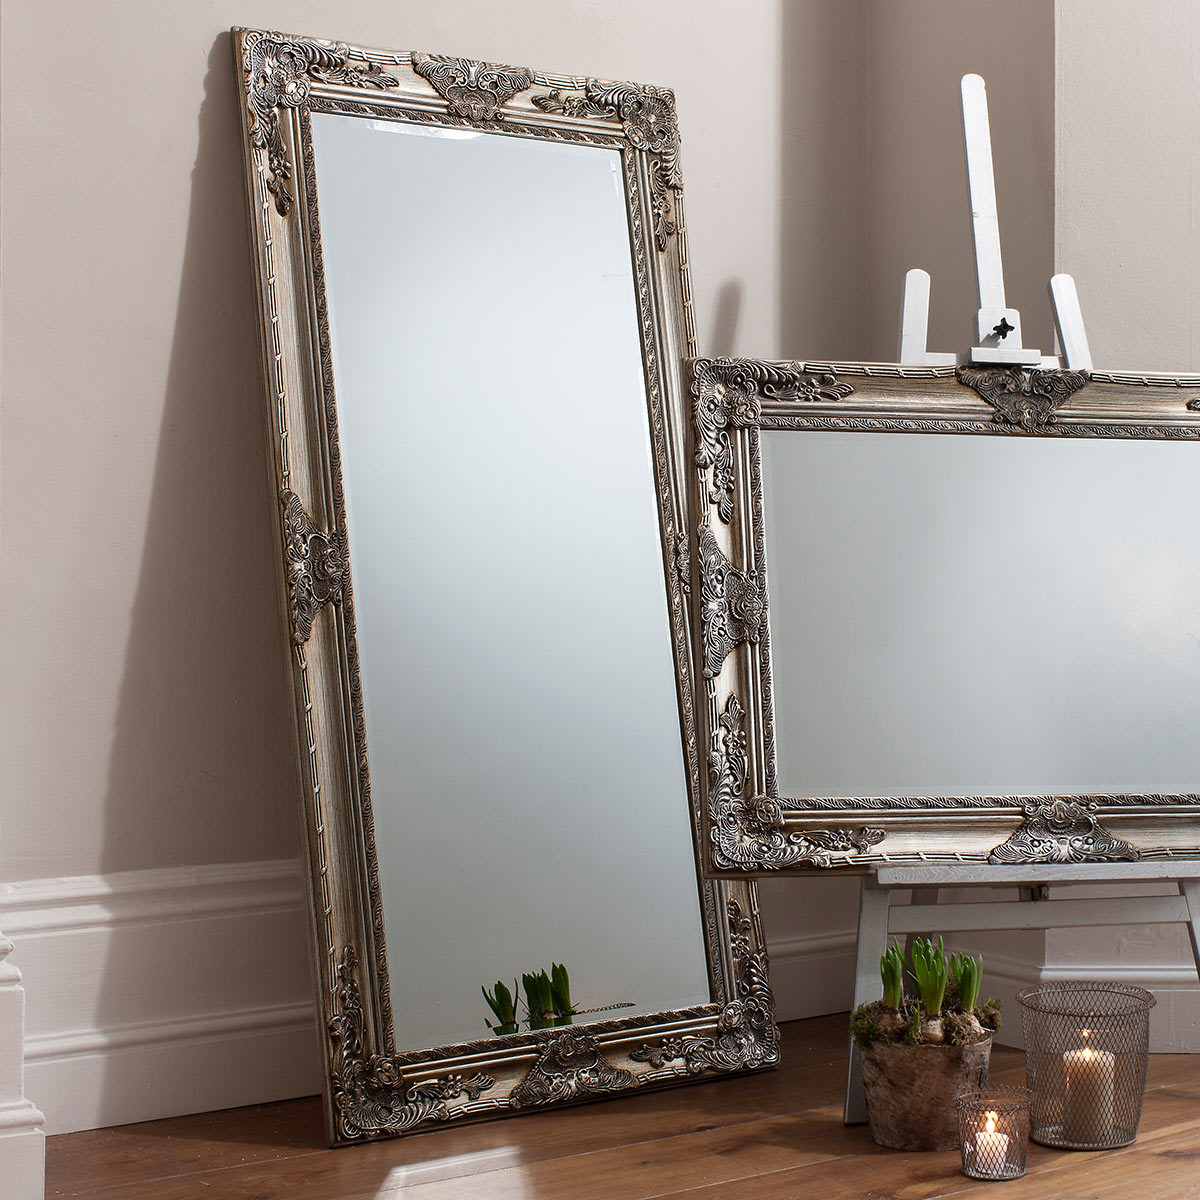 Gallery Hampshire Silver Leaner Mirror, 84 x 170cm